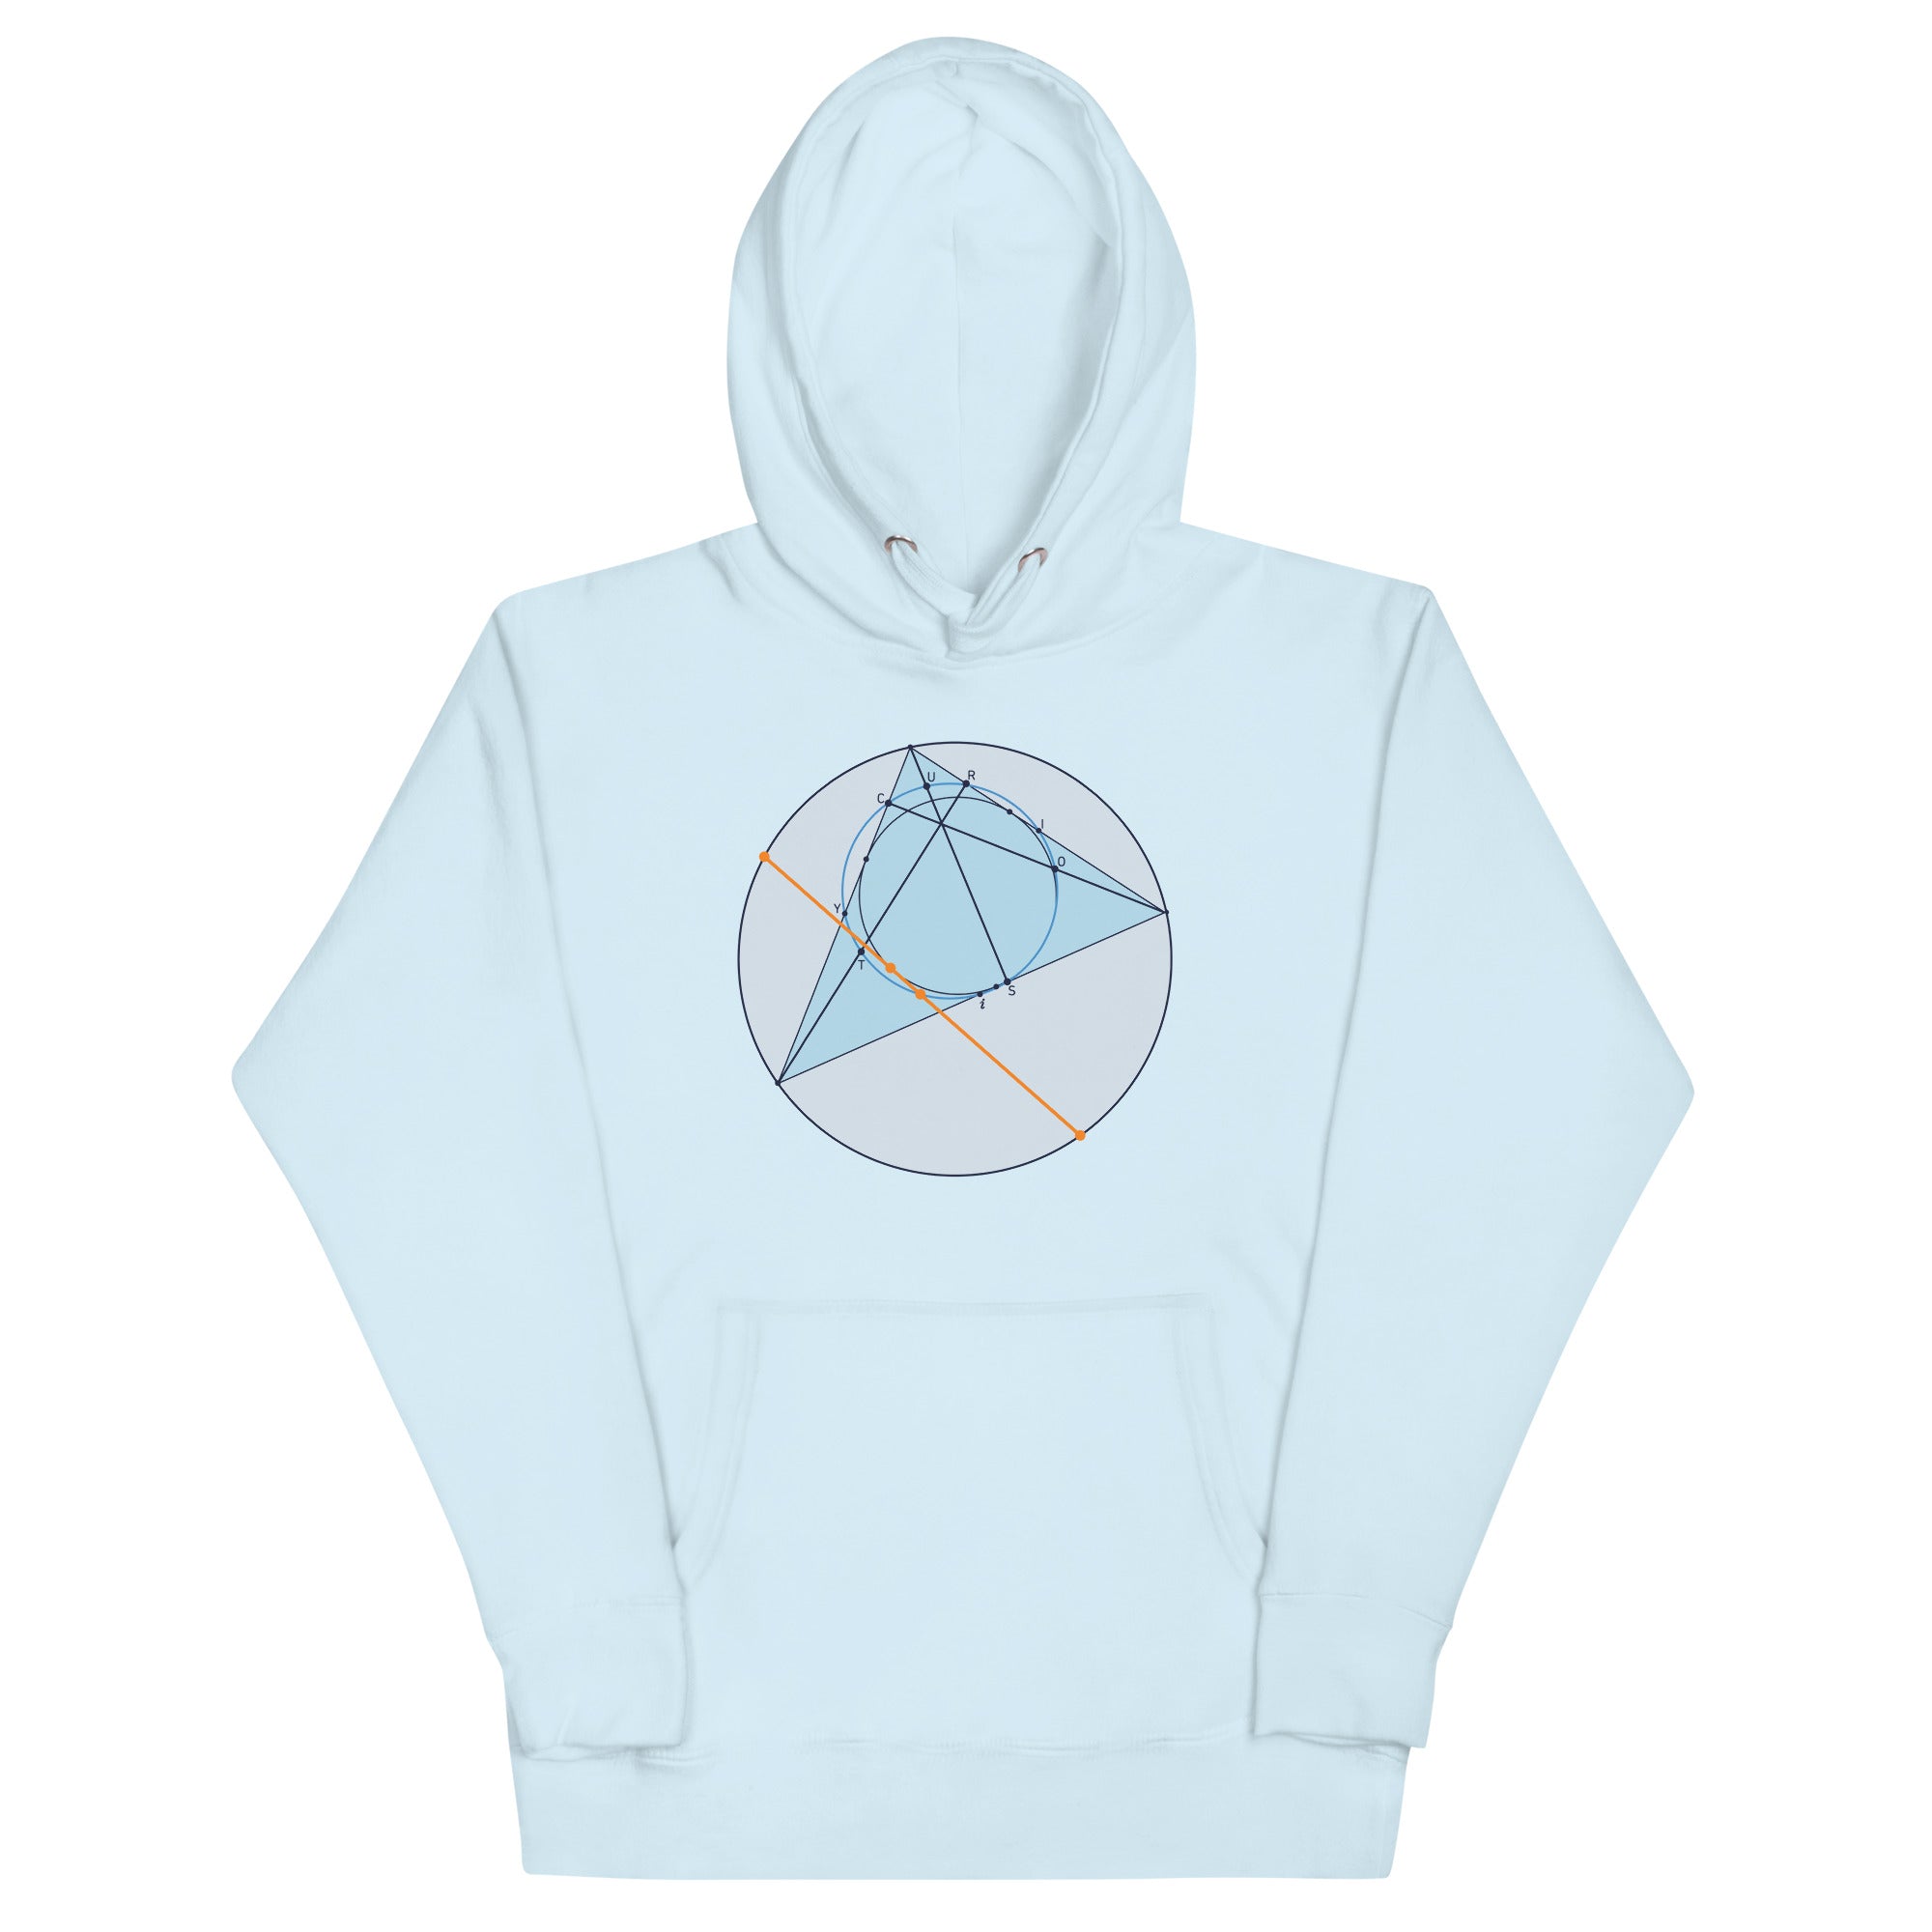 4th Side of the Triangle Hoodie